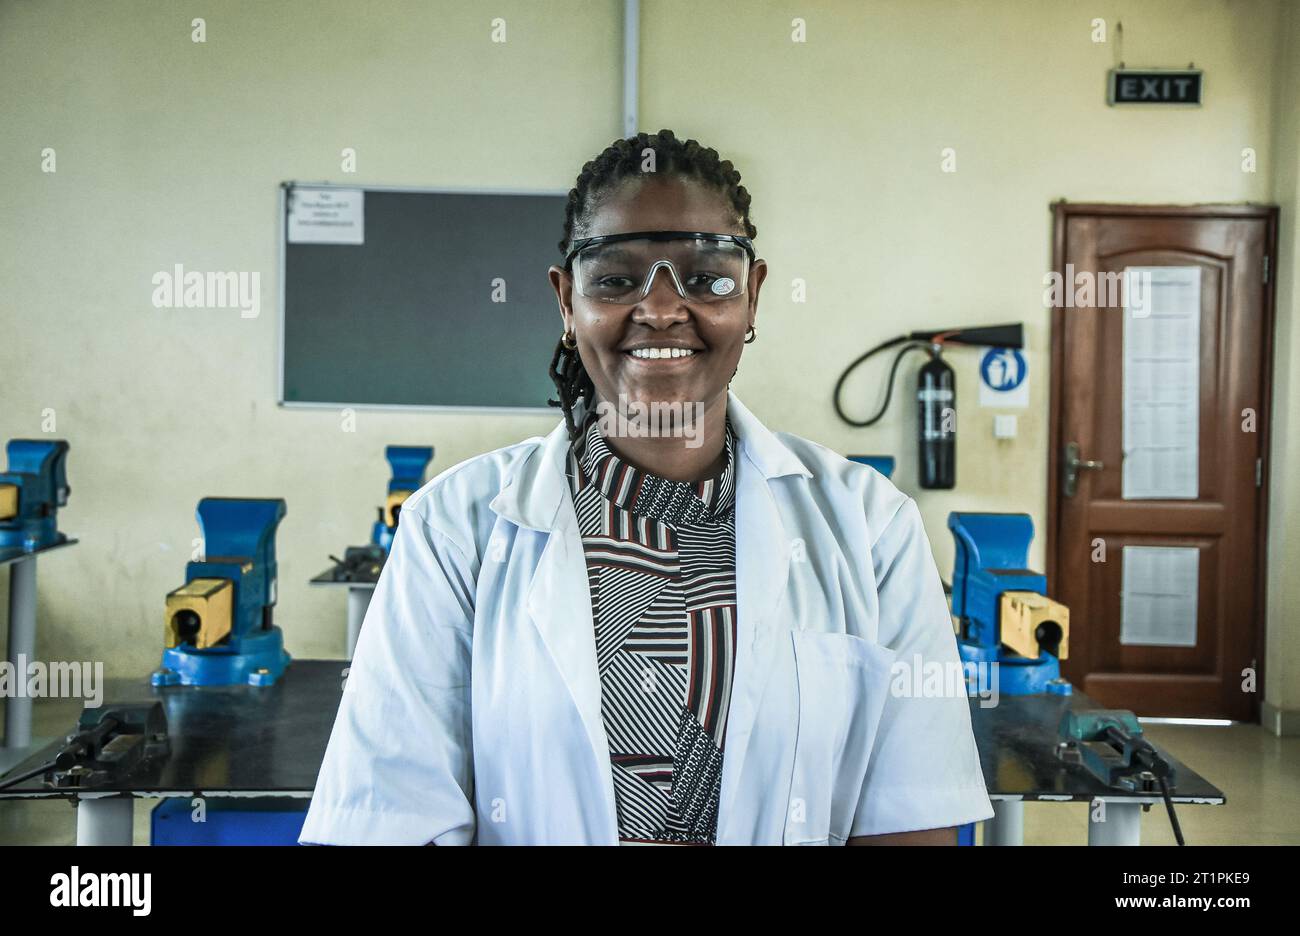 A portrait of the female technician at the vocational training centre in Dar es Salaam, Tanzania on October 1, 2021 Stock Photo